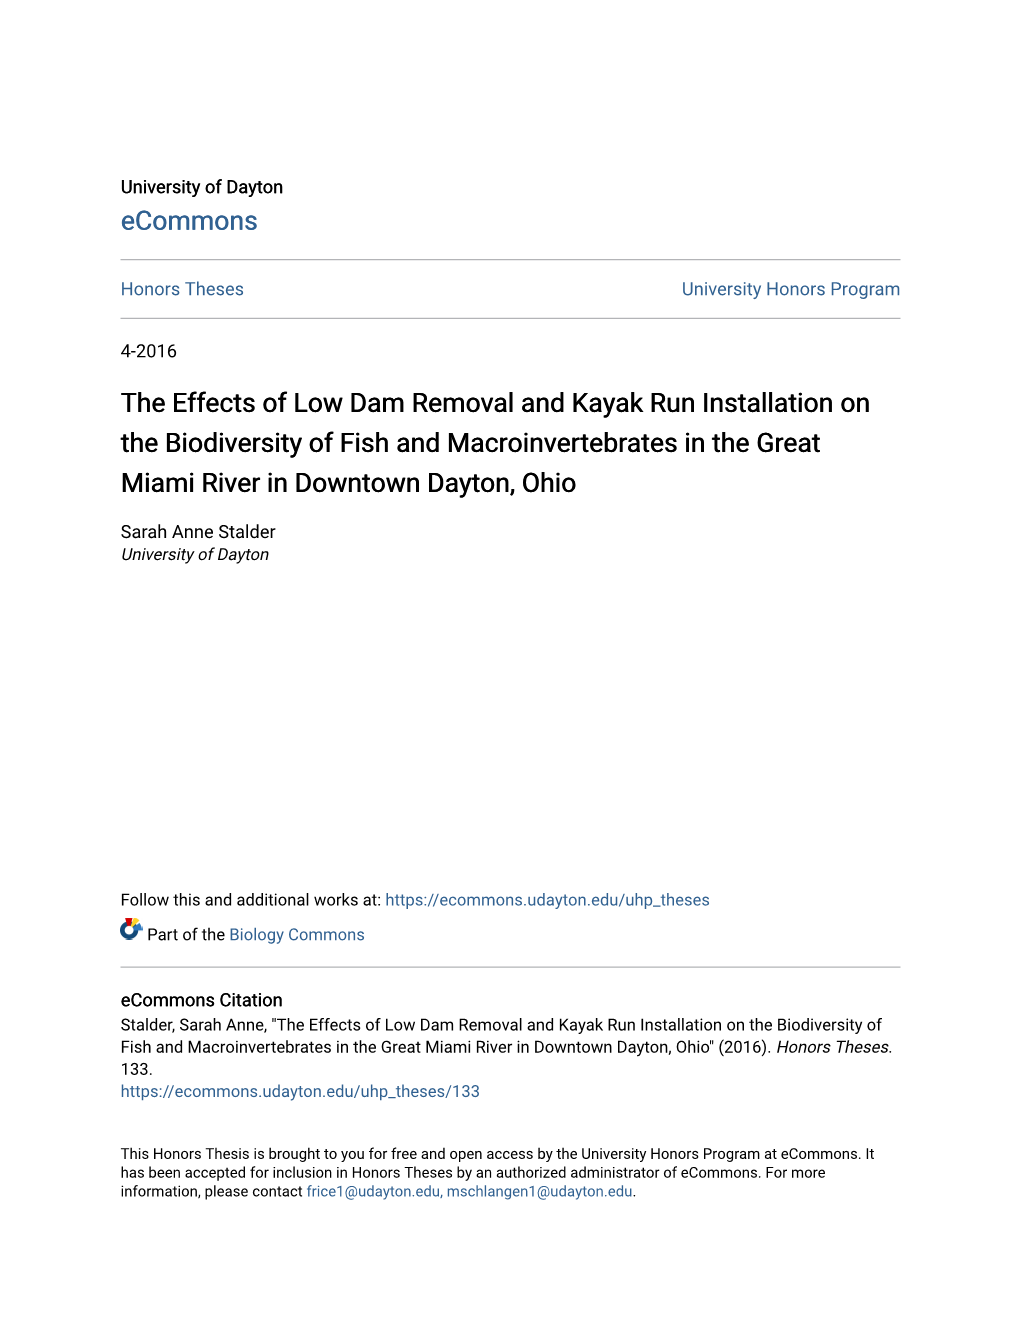 The Effects of Low Dam Removal and Kayak Run Installation on the Biodiversity of Fish and Macroinvertebrates in the Great Miami River in Downtown Dayton, Ohio